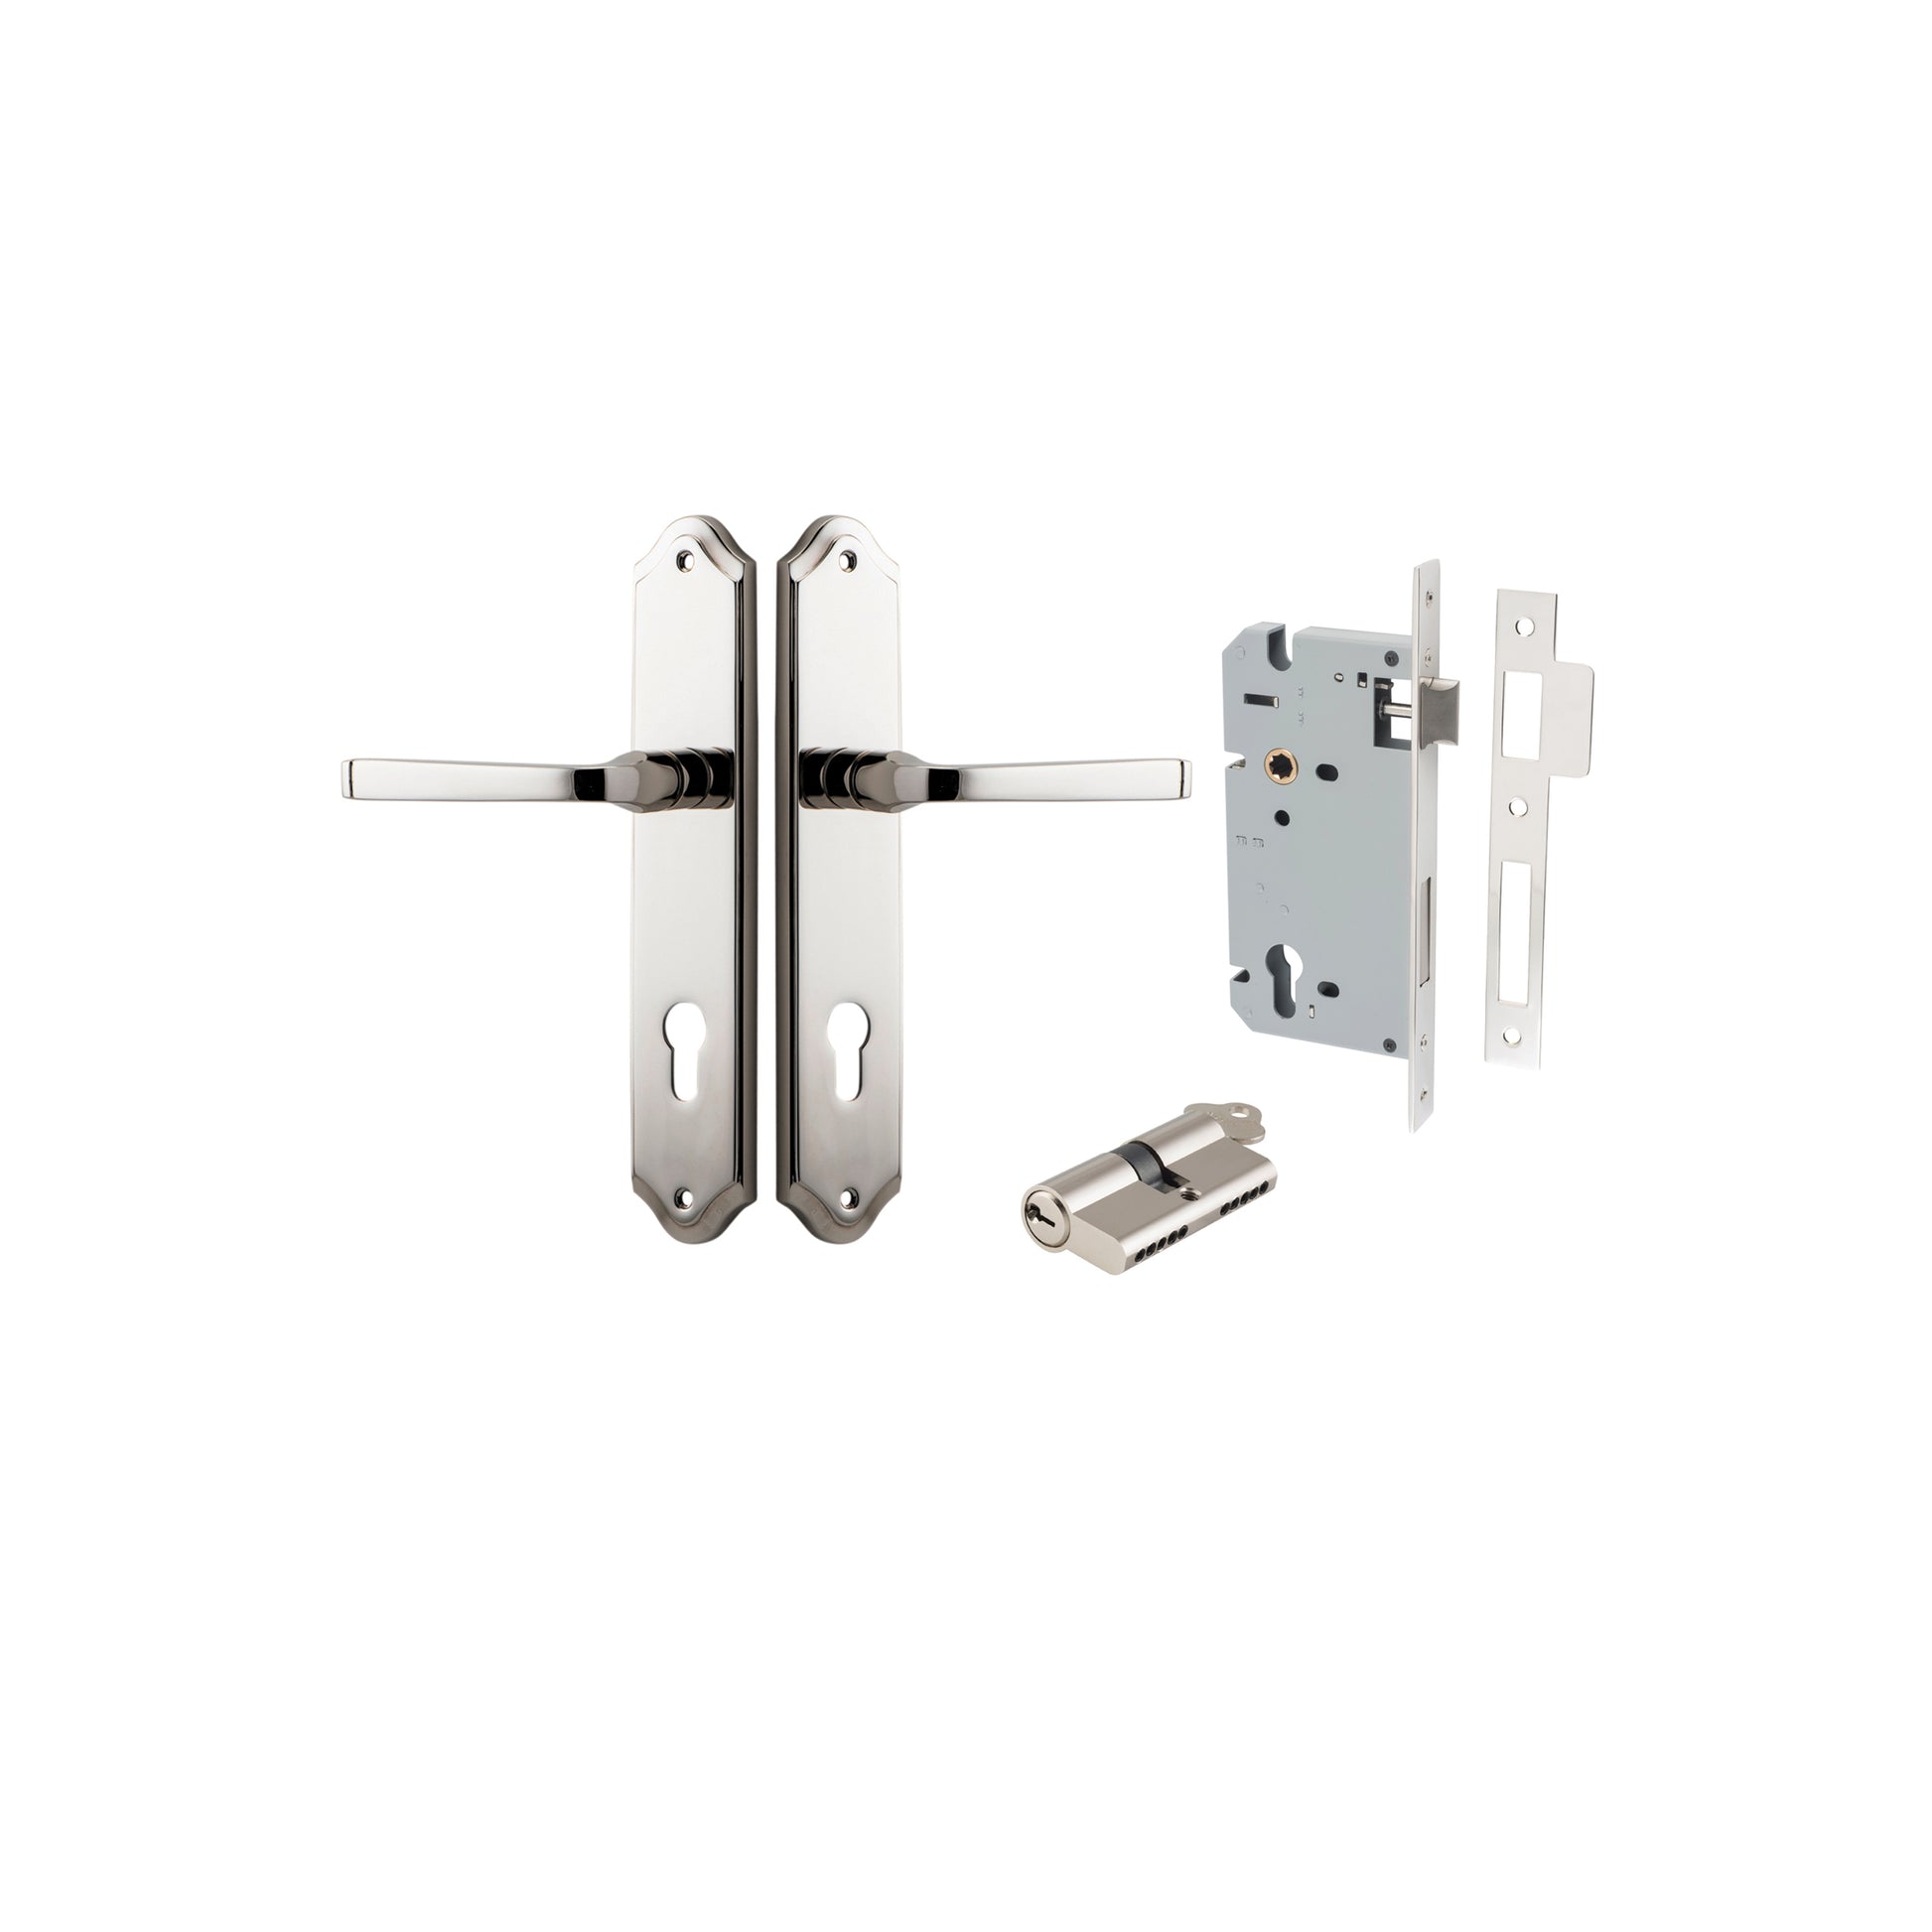 Door Lever Annecy Shouldered Euro Polished Nickel CTC85mm H240xW50xP65mm Entrance Kit, Mortice Lock Euro Polished Nickel CTC85mm Backset 60mm, Euro Cylinder Dual Function 5 Pin Polished Nickel L65mm KA1 in Polished Nickel